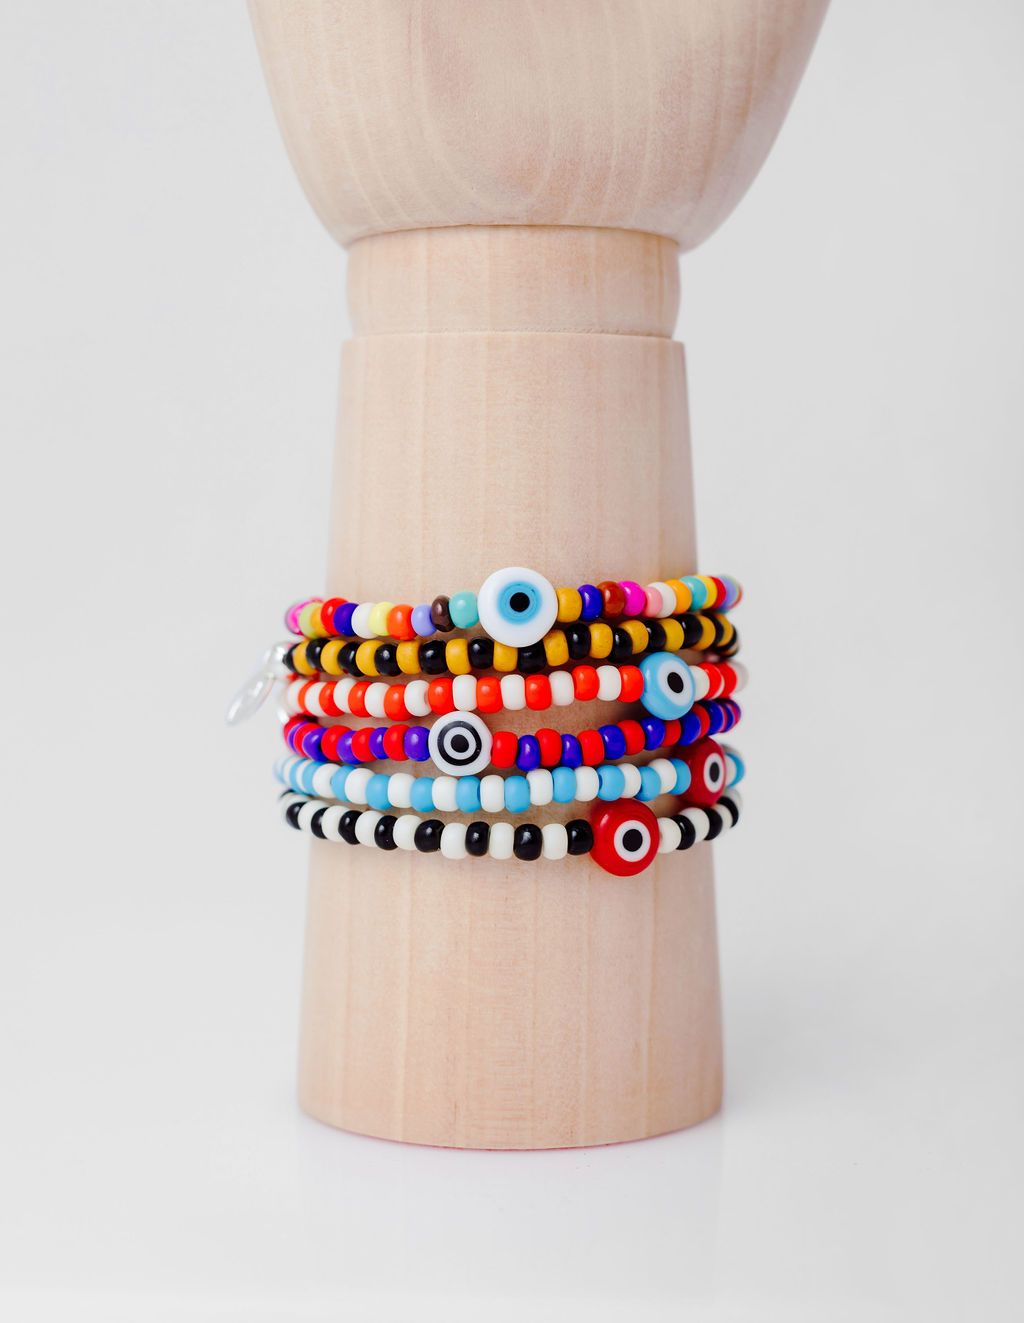 7" glass beaded bracelet - was thinking about Pippi Longstocking‘s legs on this one!